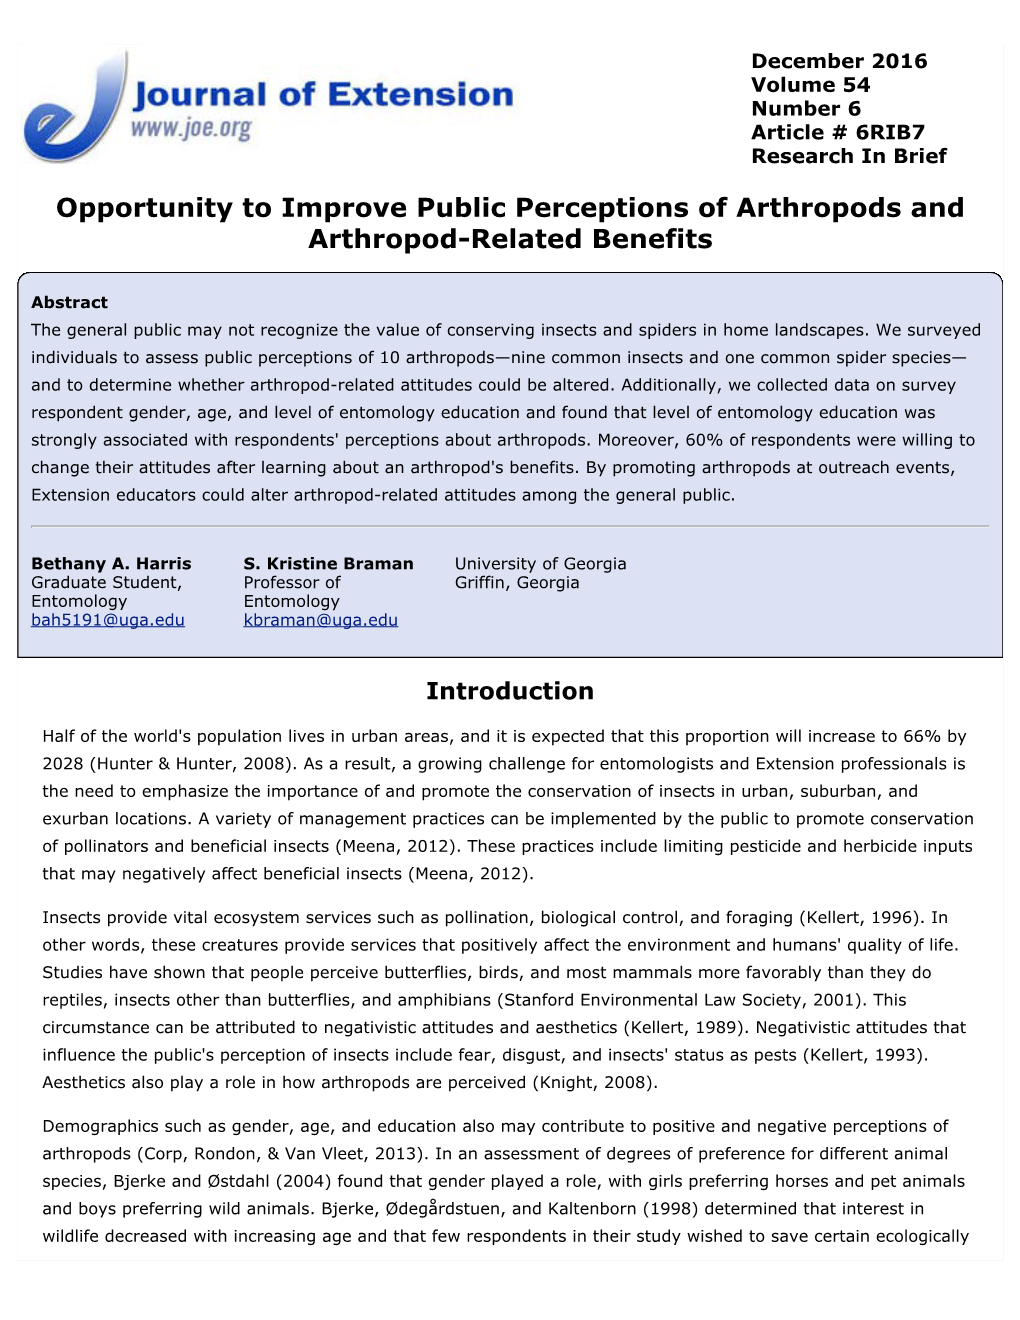 Opportunity to Improve Public Perceptions of Arthropods and Arthropod-Related Benefits